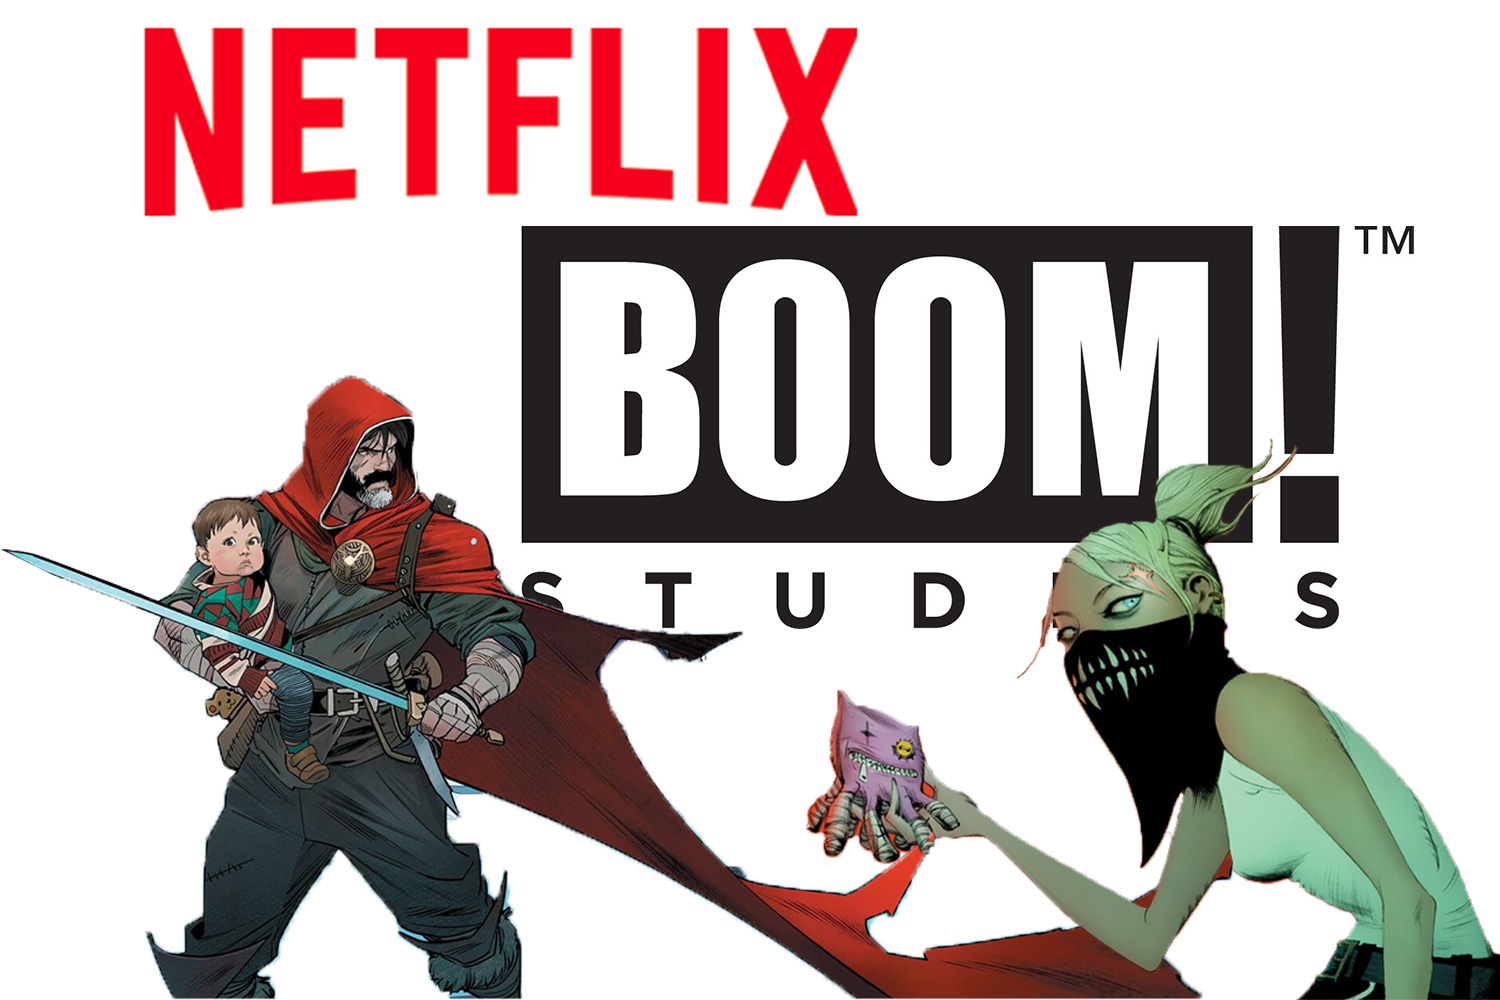 More comics content streaming in your future: Netflix inks first-look deal with BOOM! Studios